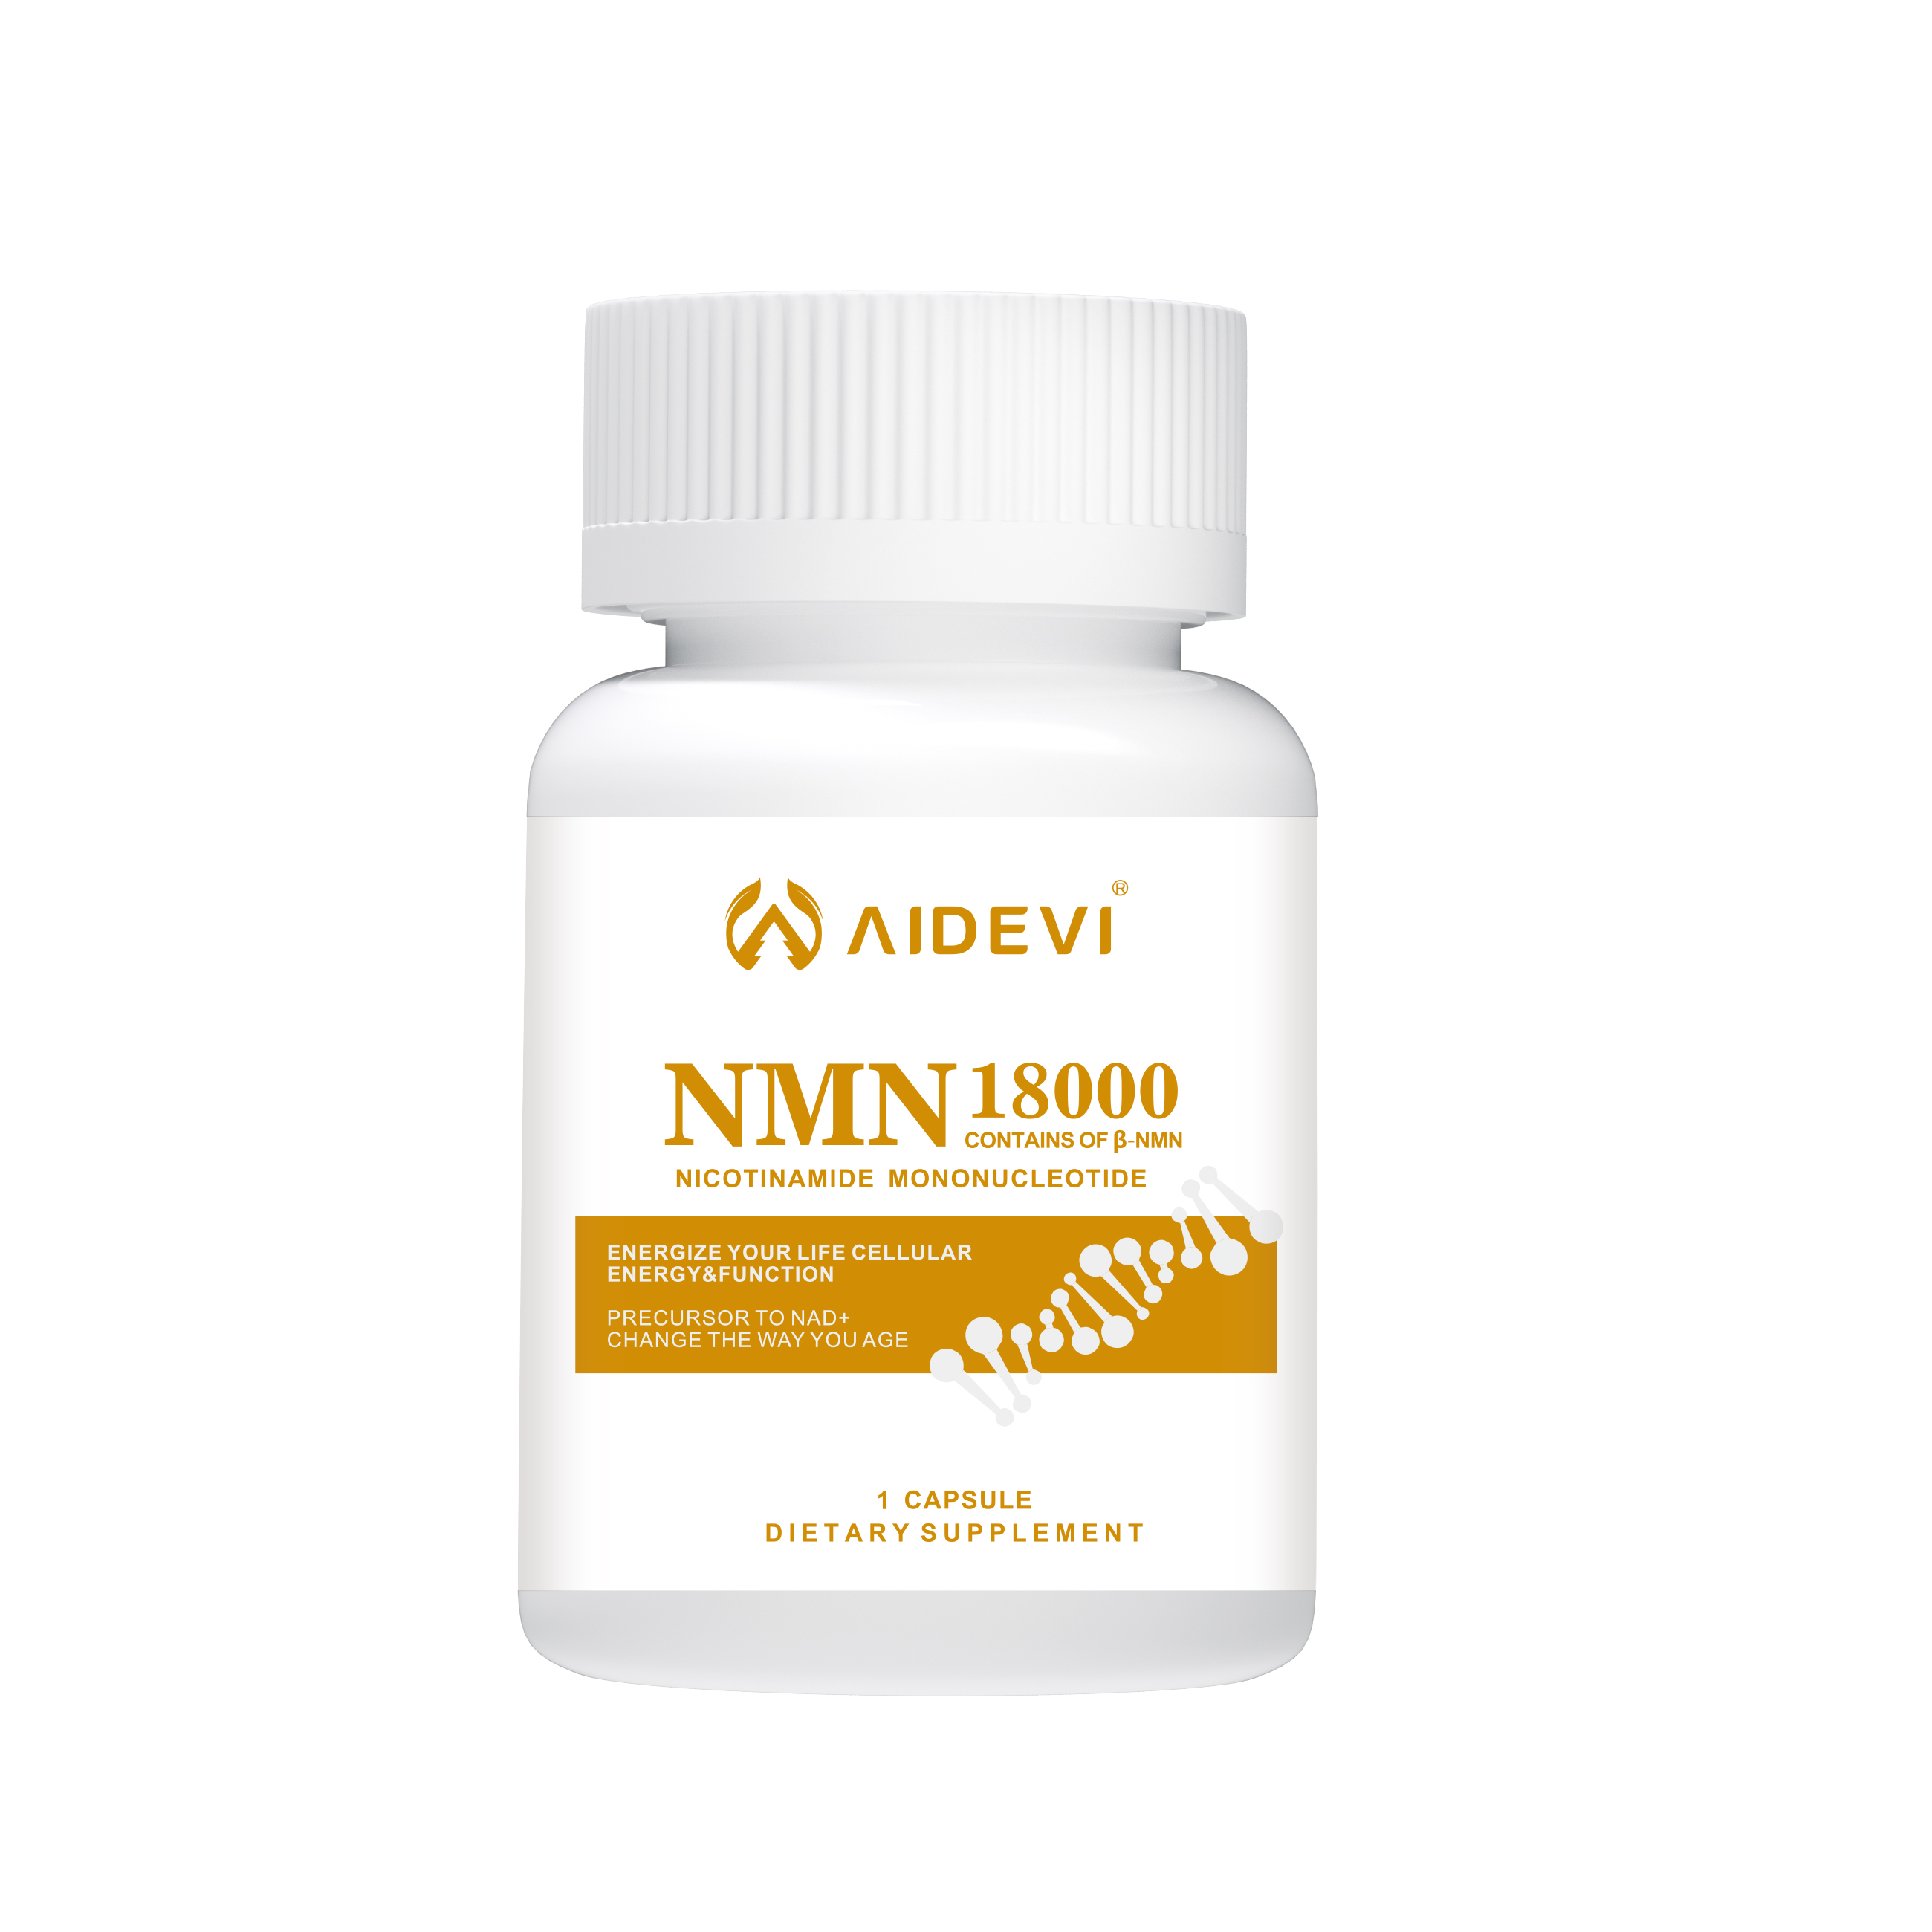 AIDEVI NMN18000 300MG NMN β-Nicotinamide Mononucleotide 60PCS CAPSULE (SET OF 5) DIETARY SUPPLEMENT MADE IN USA